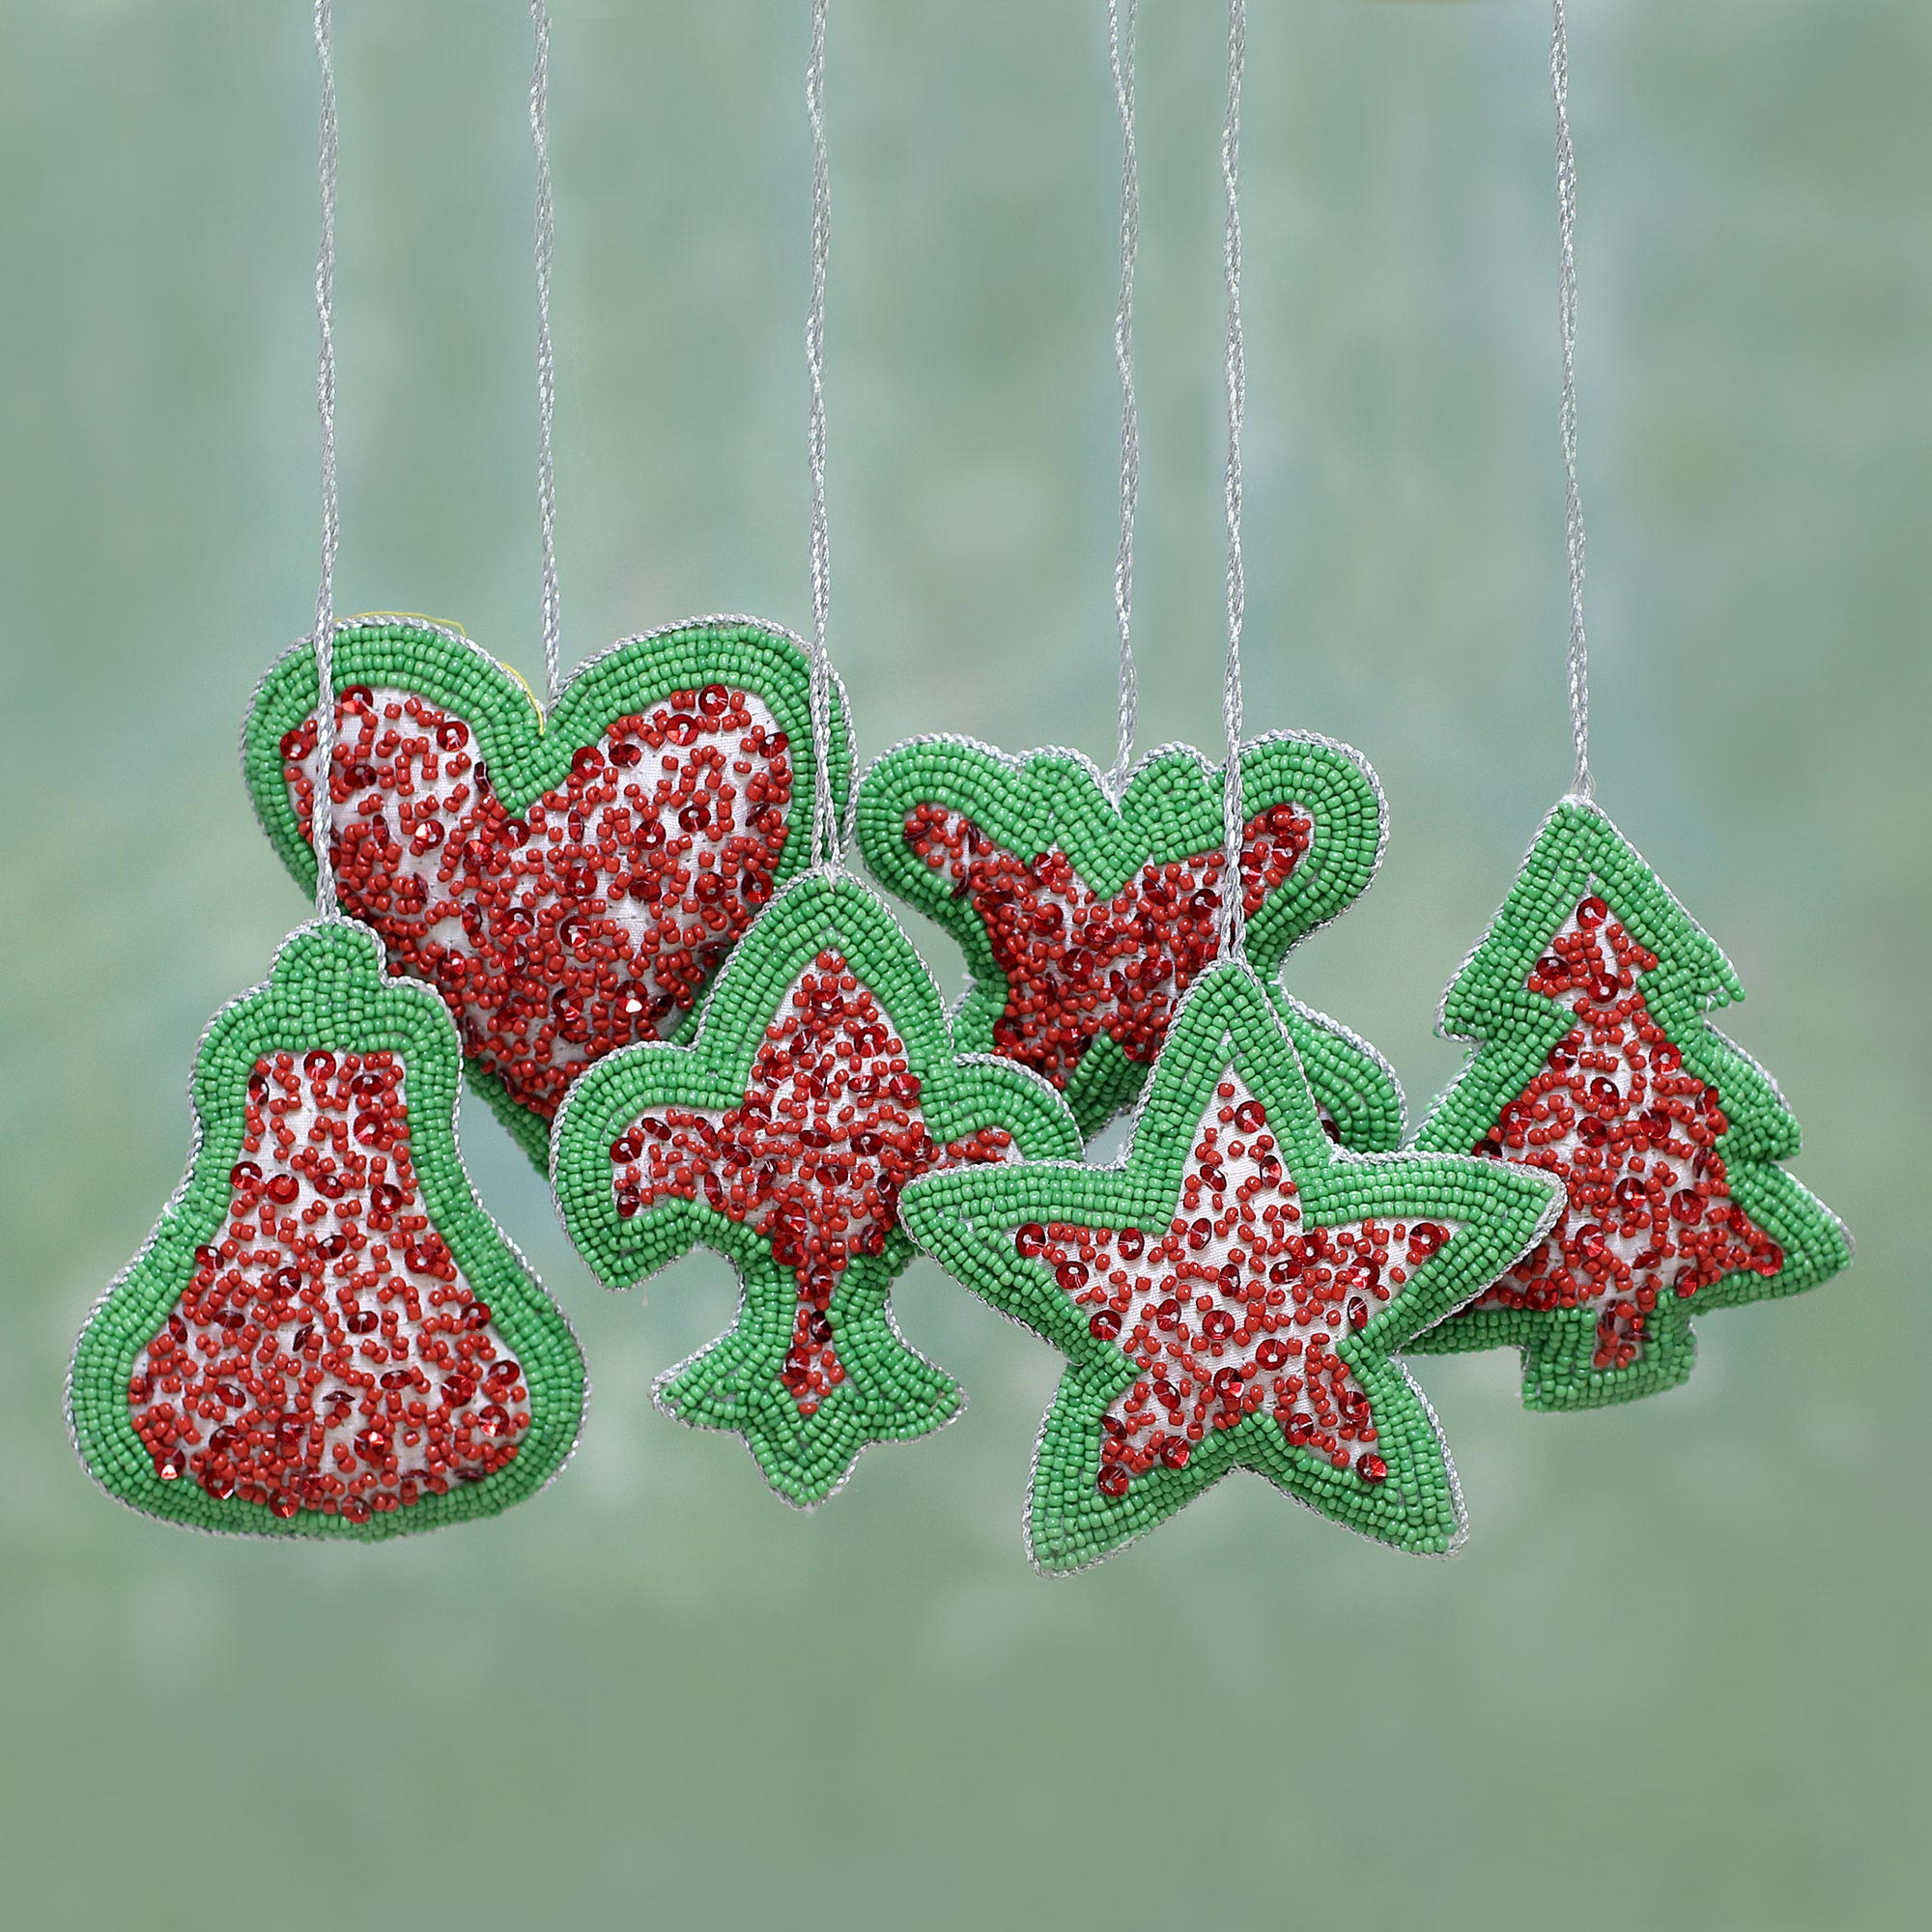 Set of Six Indian Christmas Ornaments in Red and Green - Christmas ...